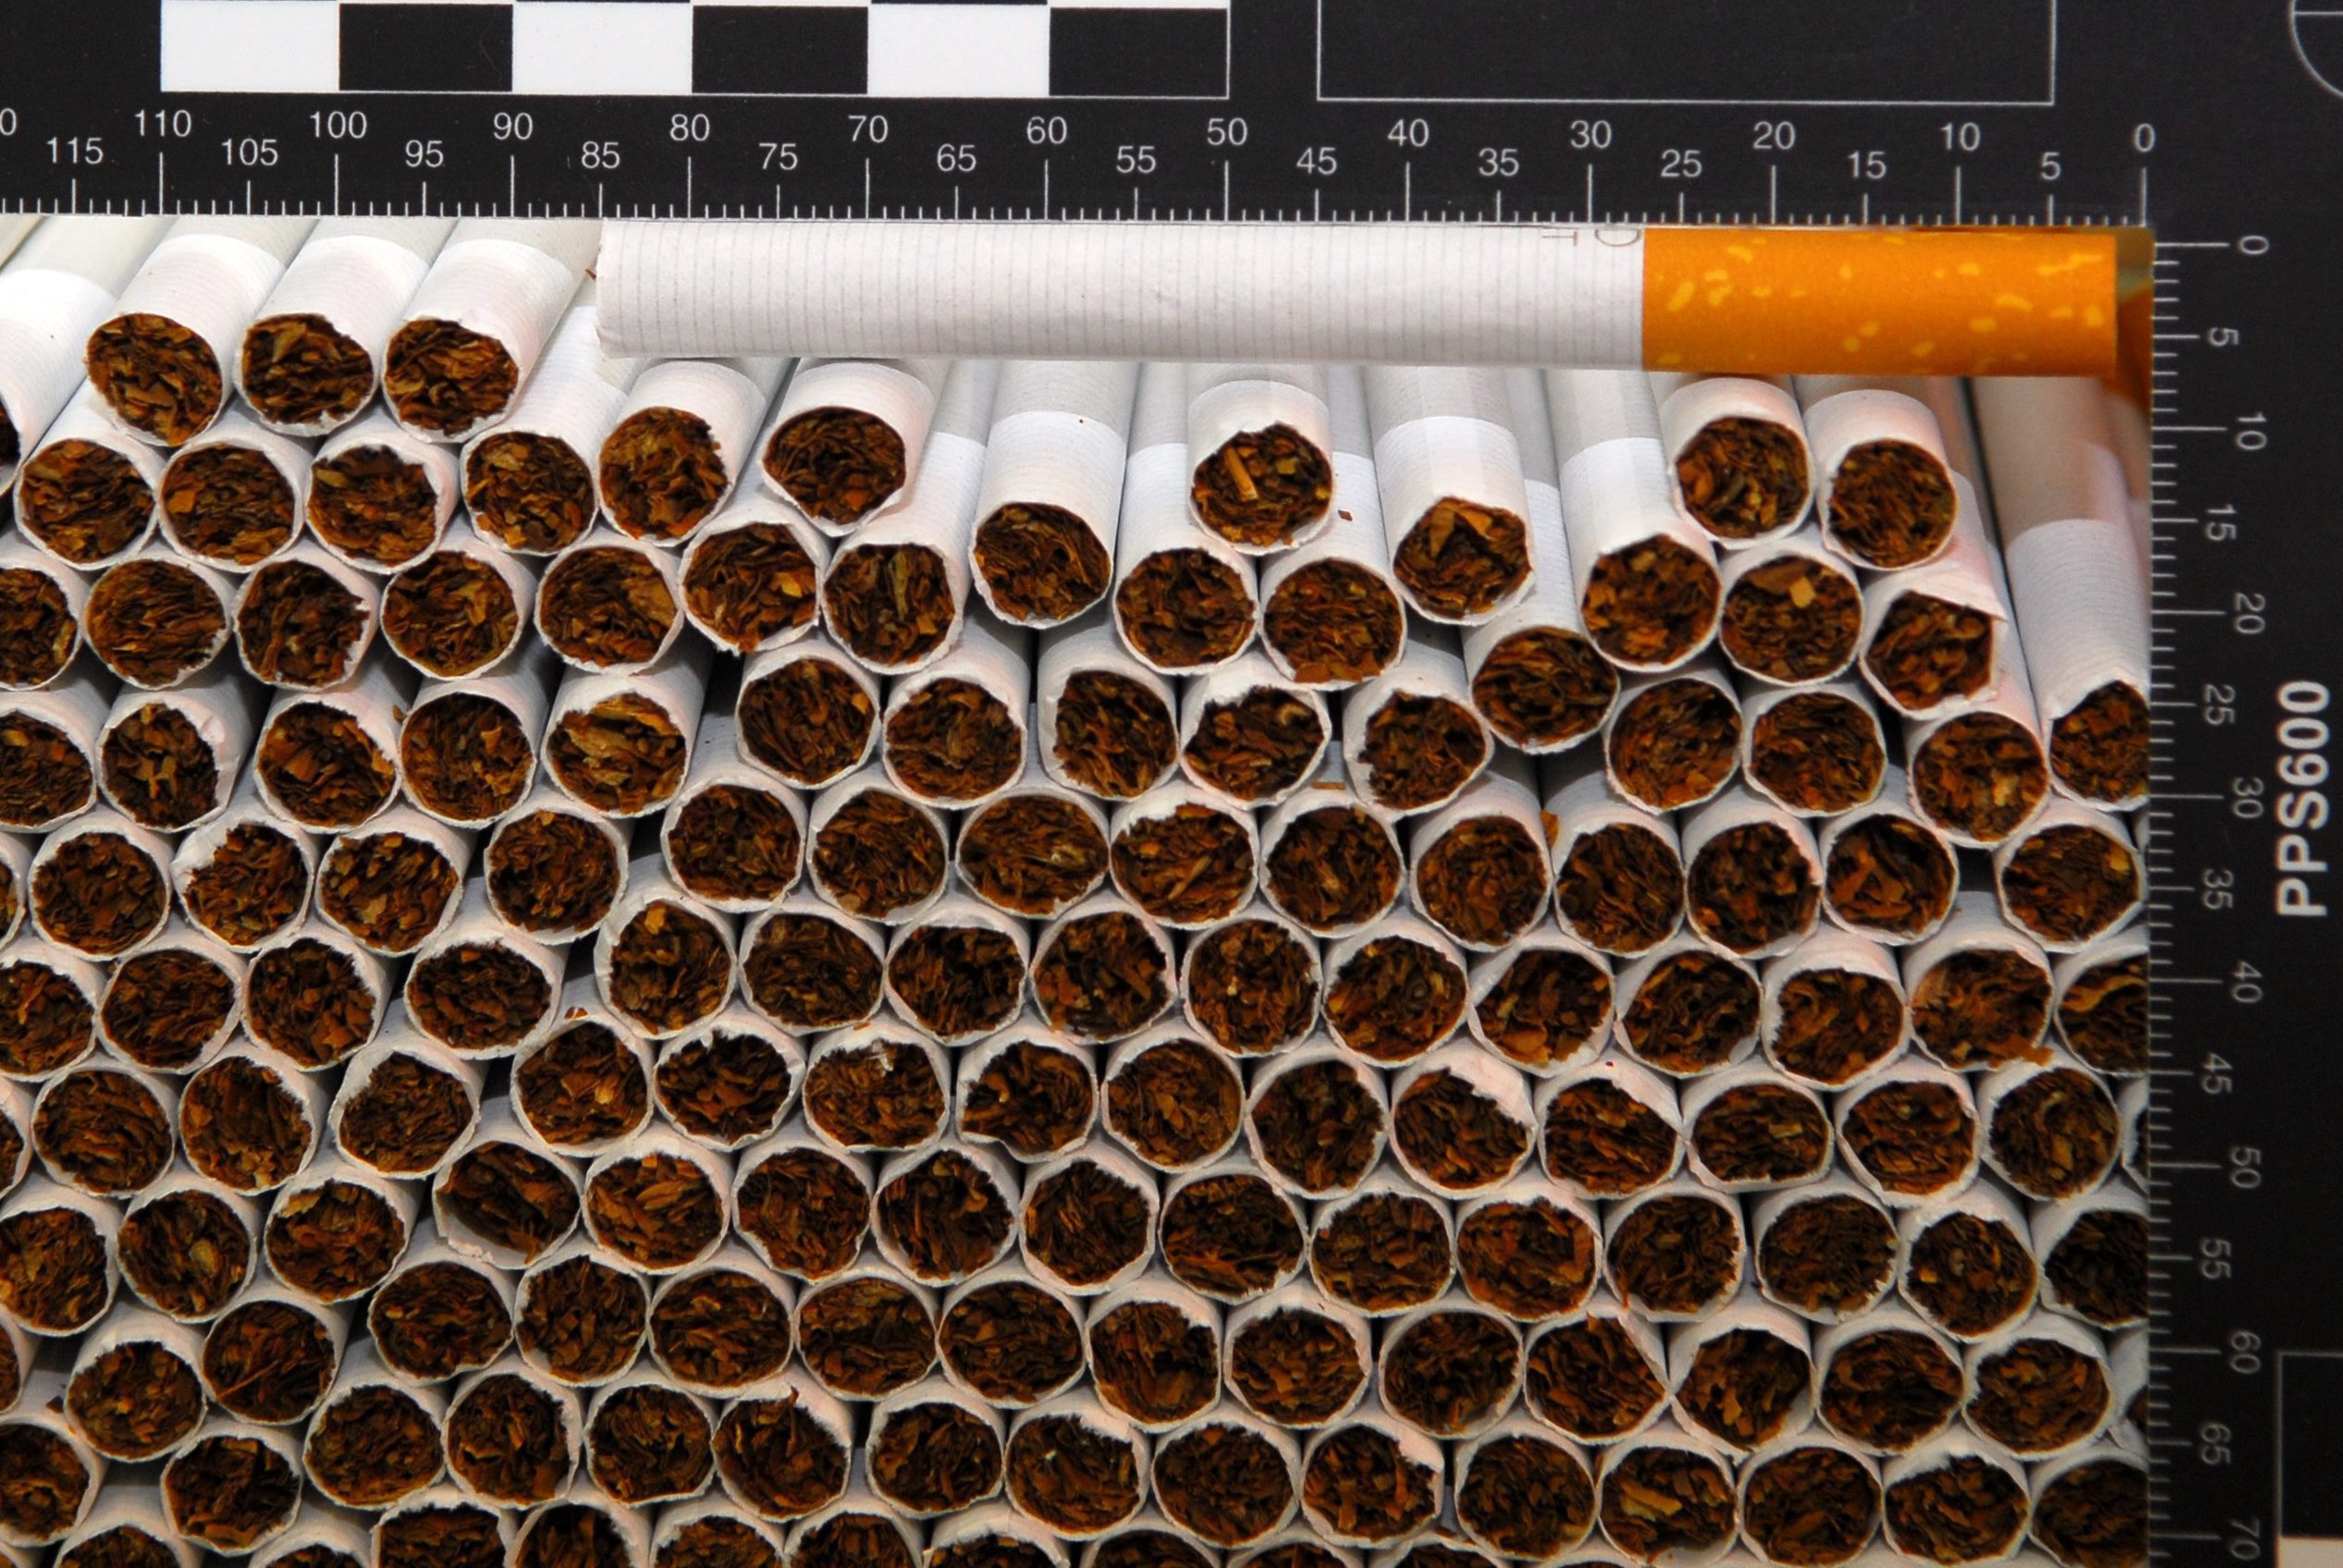 Steep Tobacco Price Increase Too Much for Hungarians' Pockets